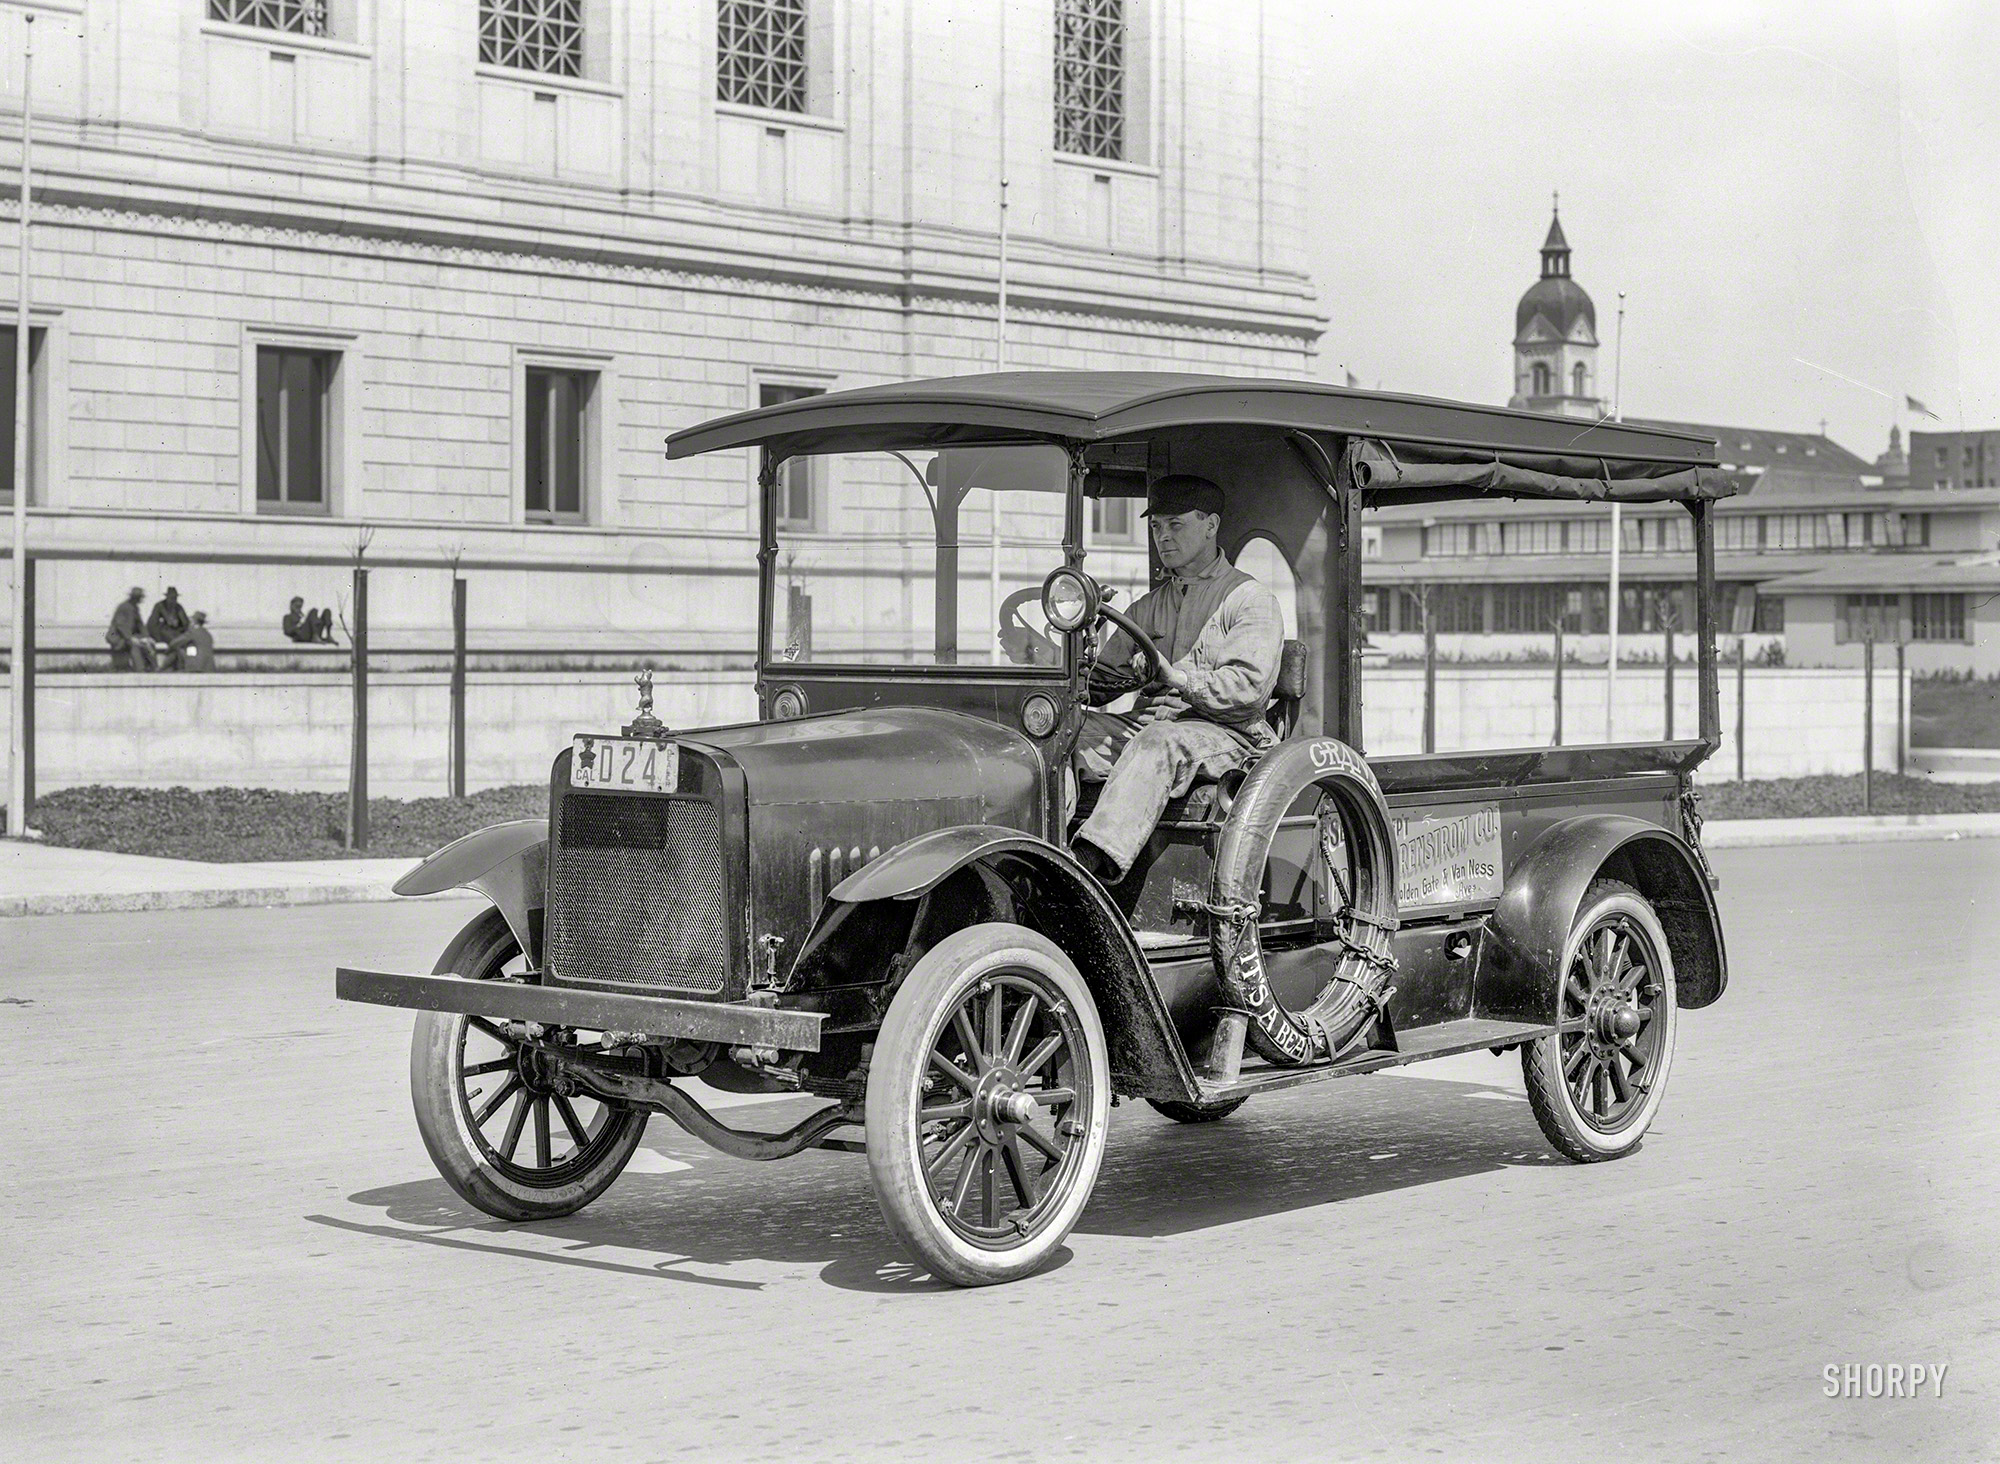 San Francisco, 1919. "Grant motor truck at Public Library." Minimally equipped, we'd say. 5x7 glass negative by Christopher Helin. View full size.